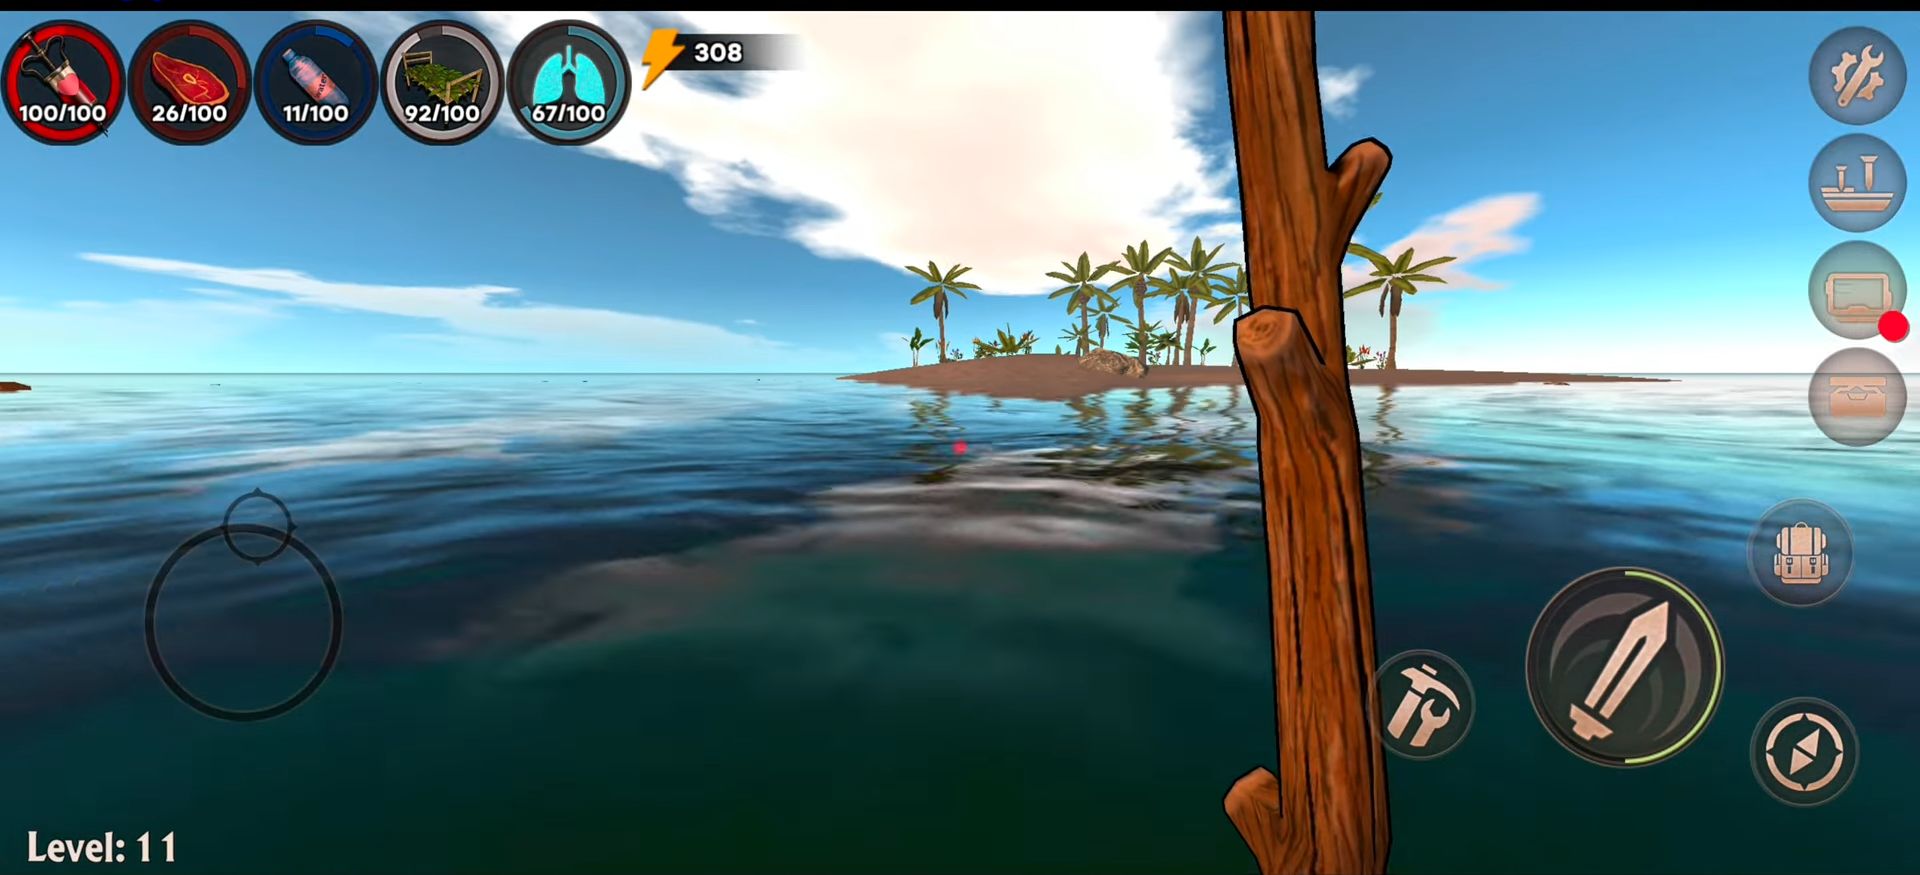 Gameplay of the The Last Maverick: Raft for Android phone or tablet.